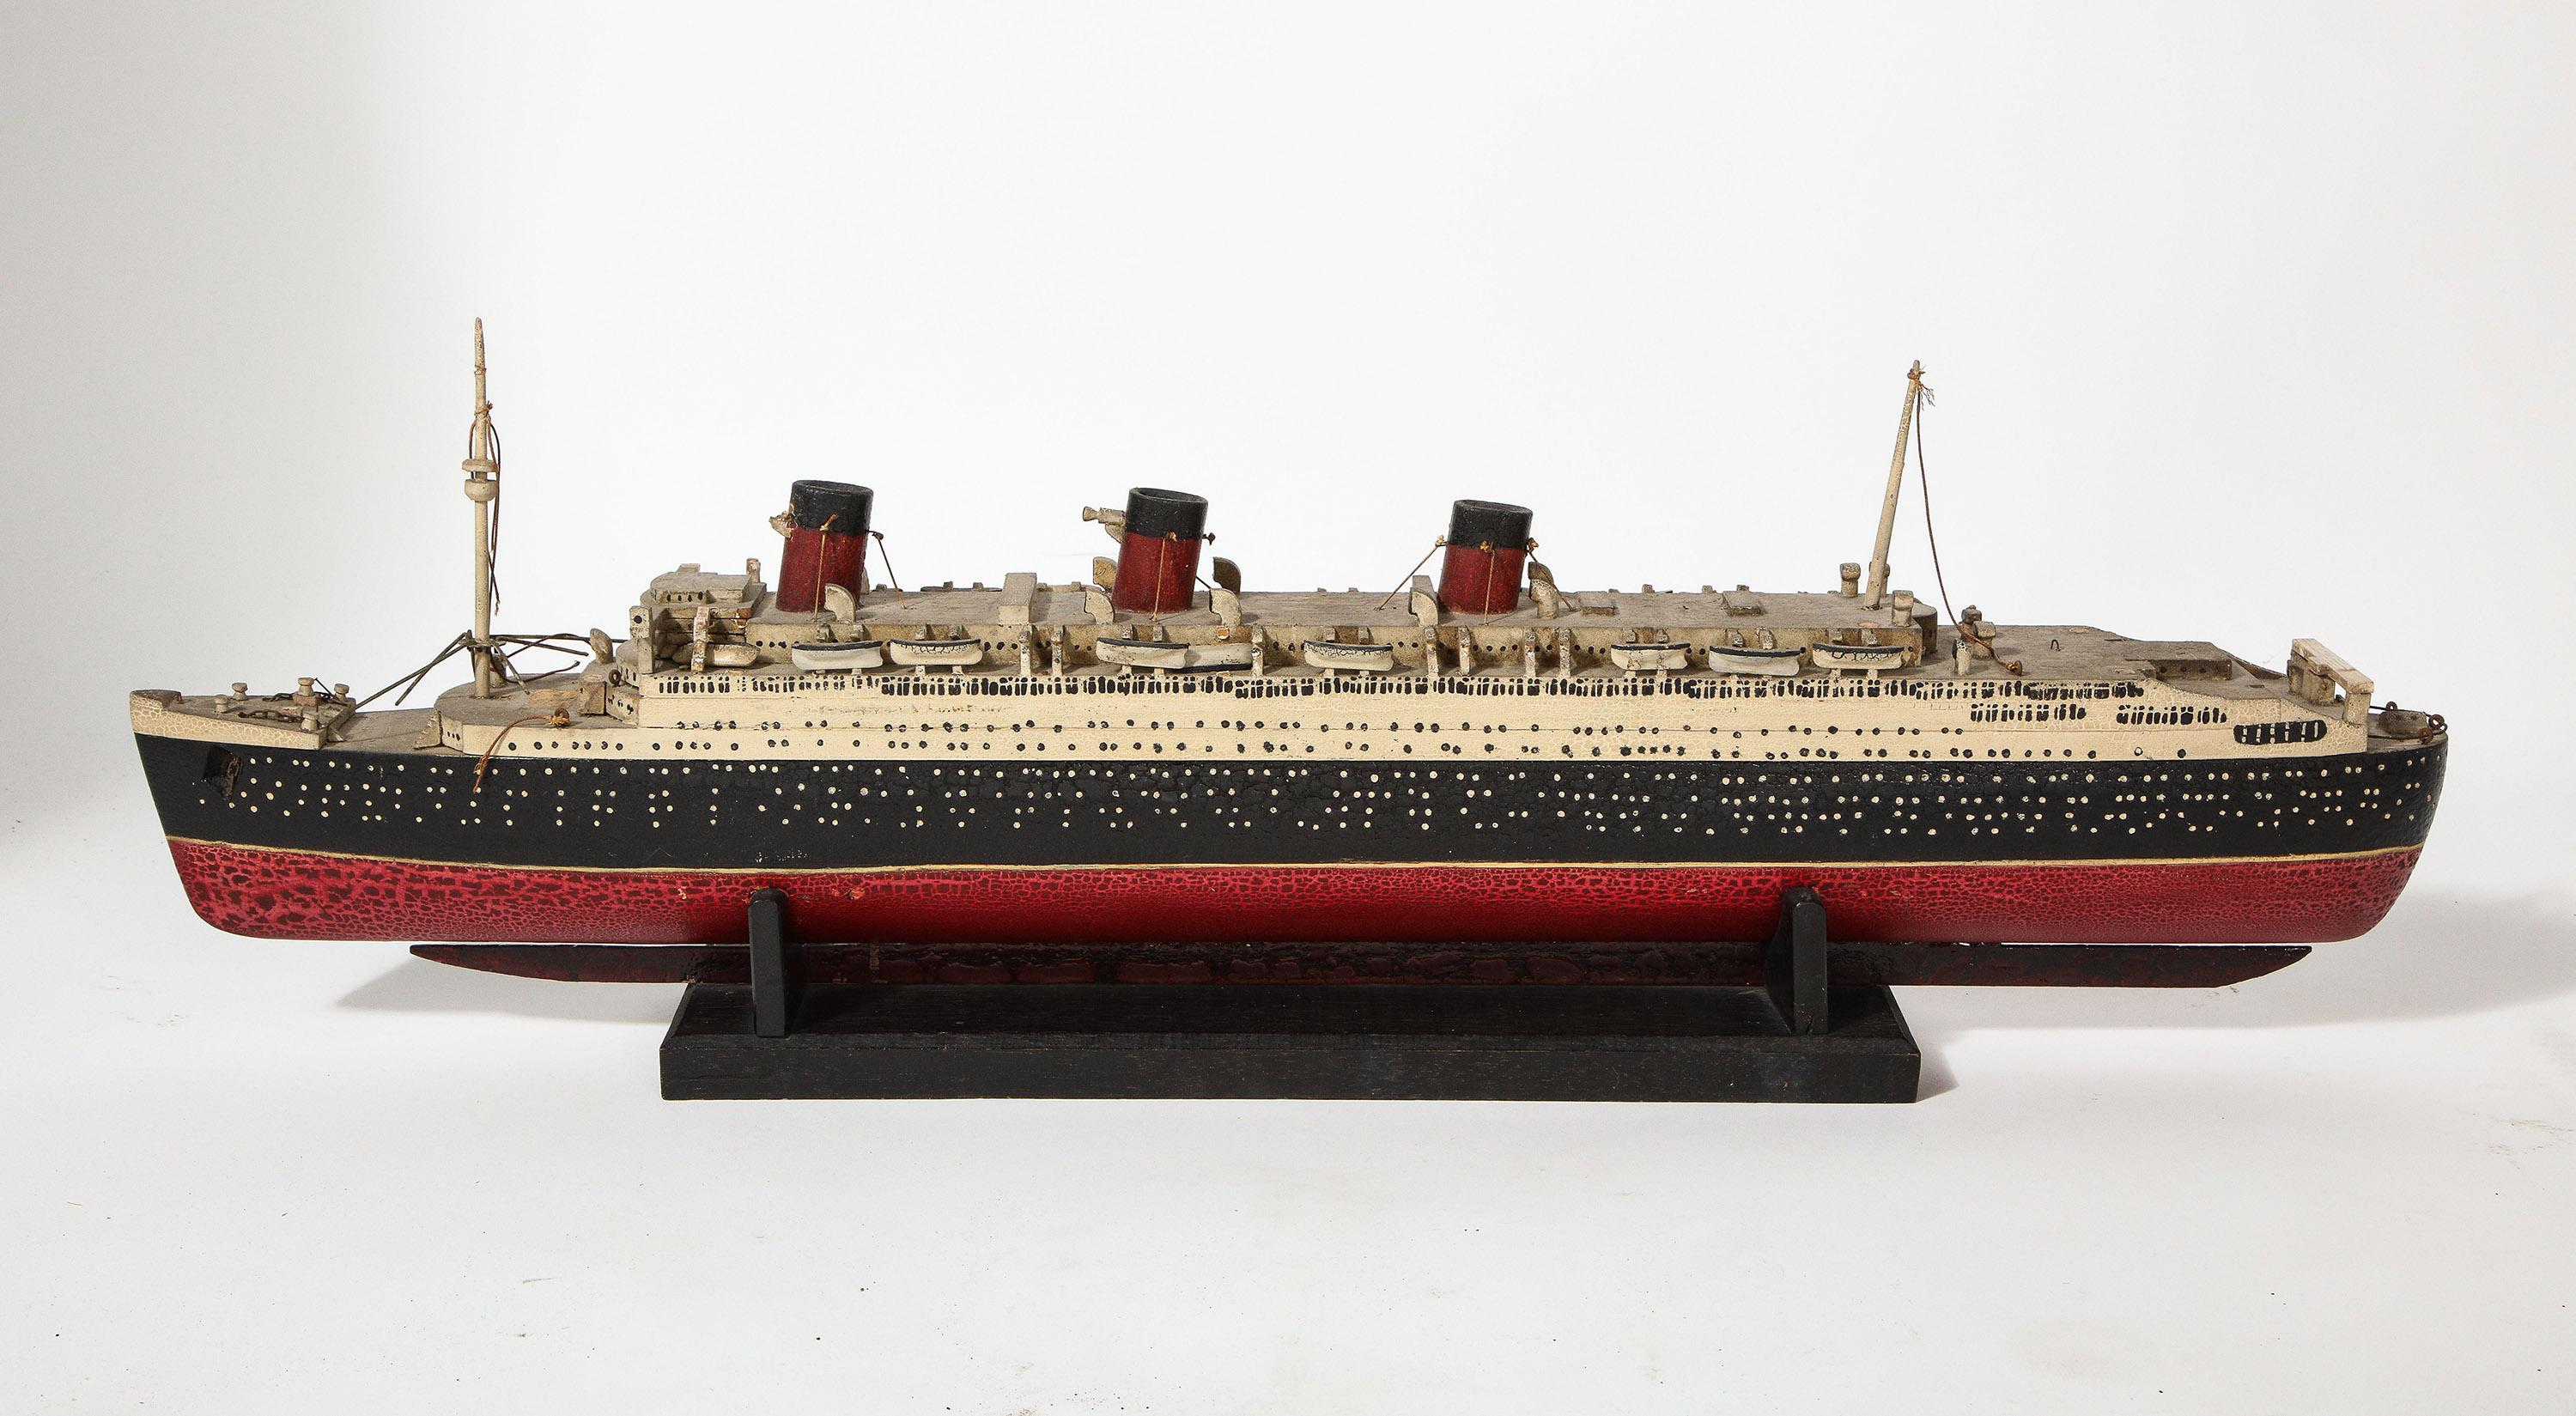 An early (probably late 1930s) model of the RMS Queen Mary all hand carved and painted down to the smallest detail. The condition is quite good with original untouched patina.